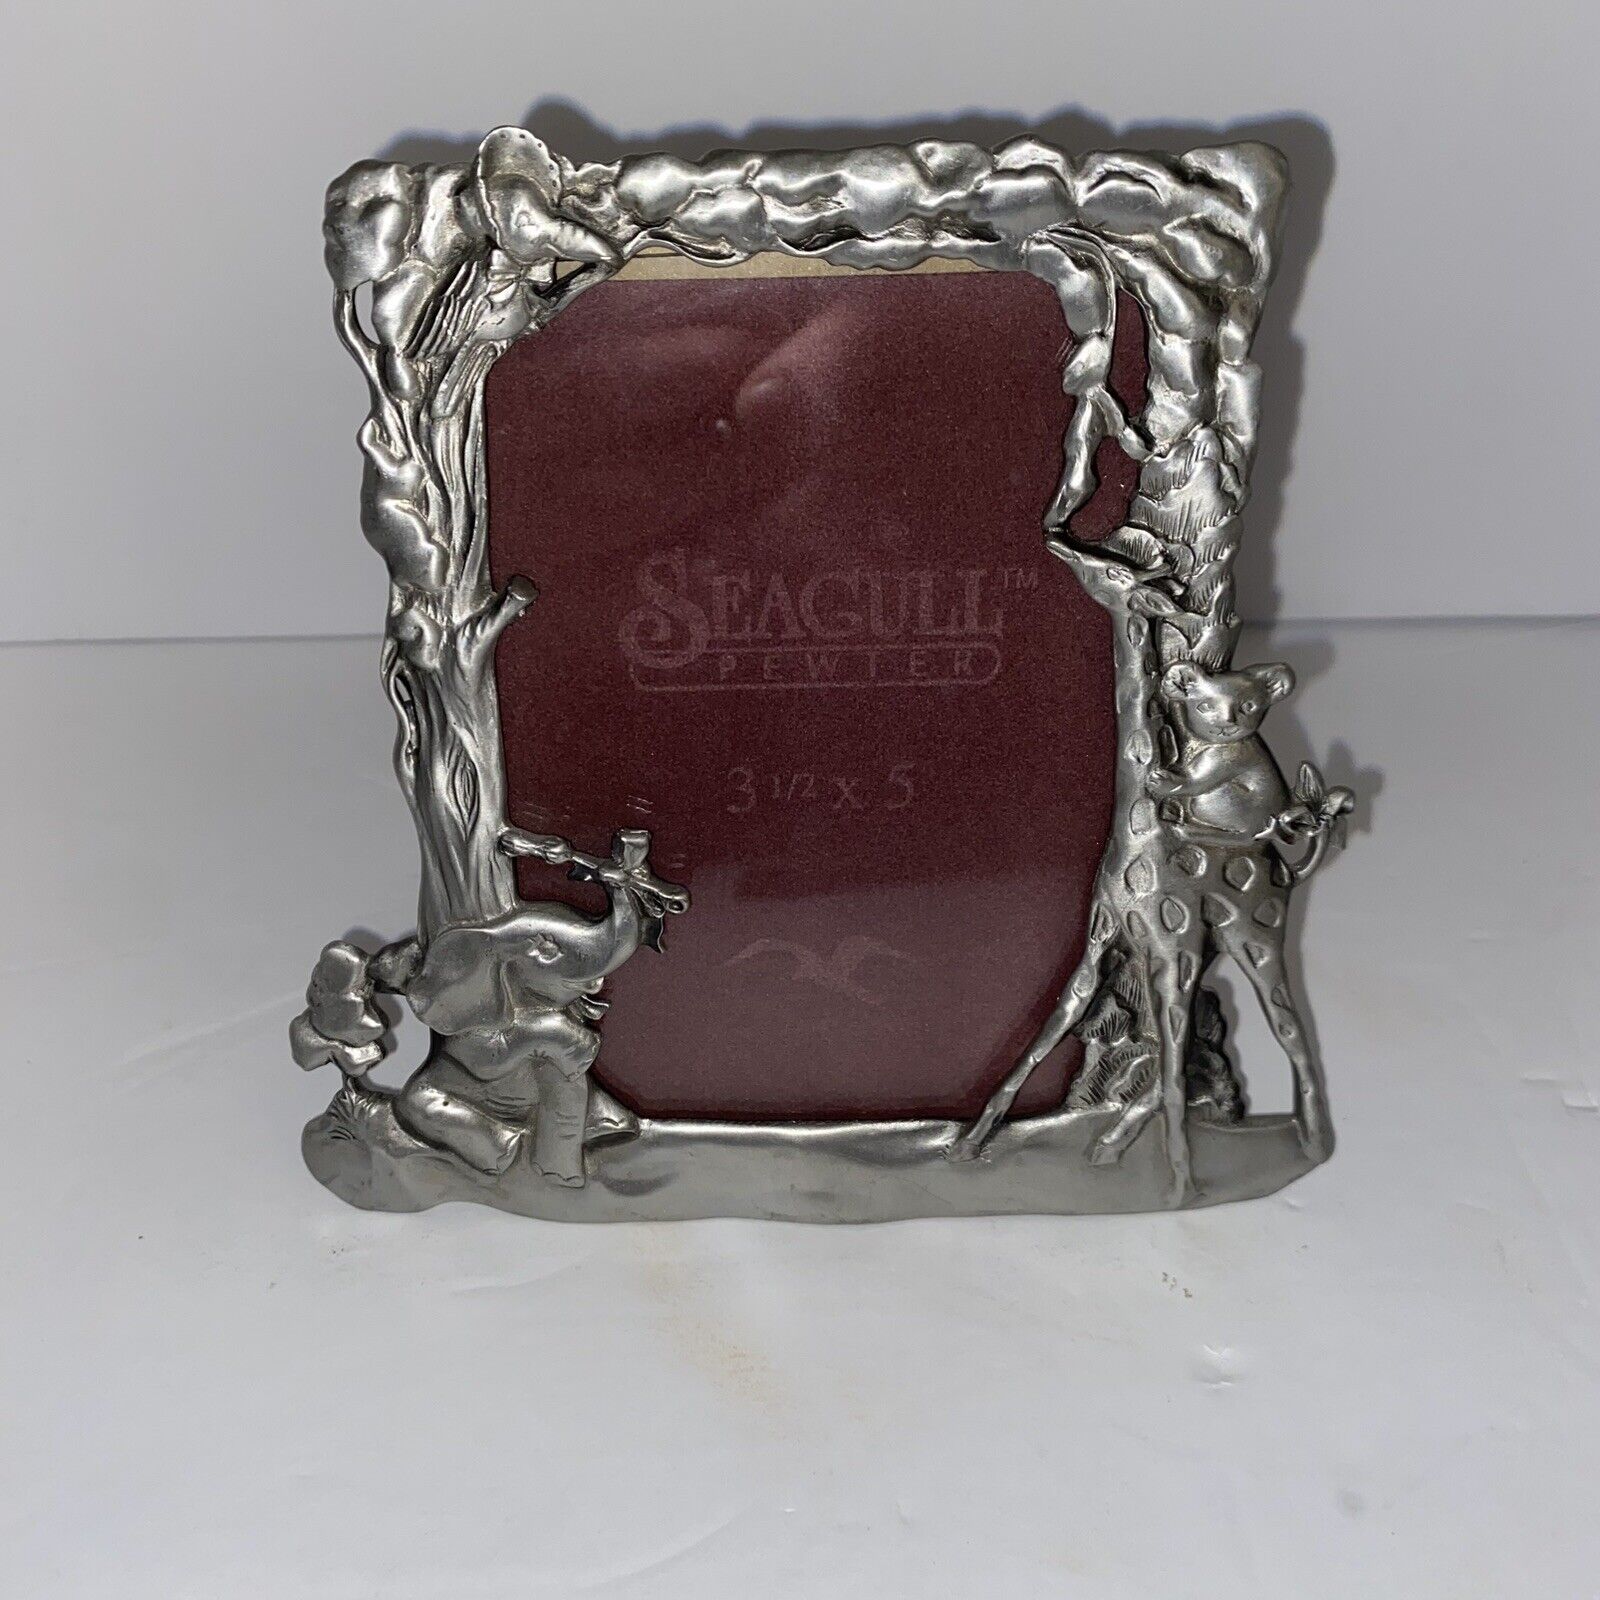 Nursery Pewter Vintage SEAGULL Picture Frame Signed Etain Zinn 1993 Baby Animals